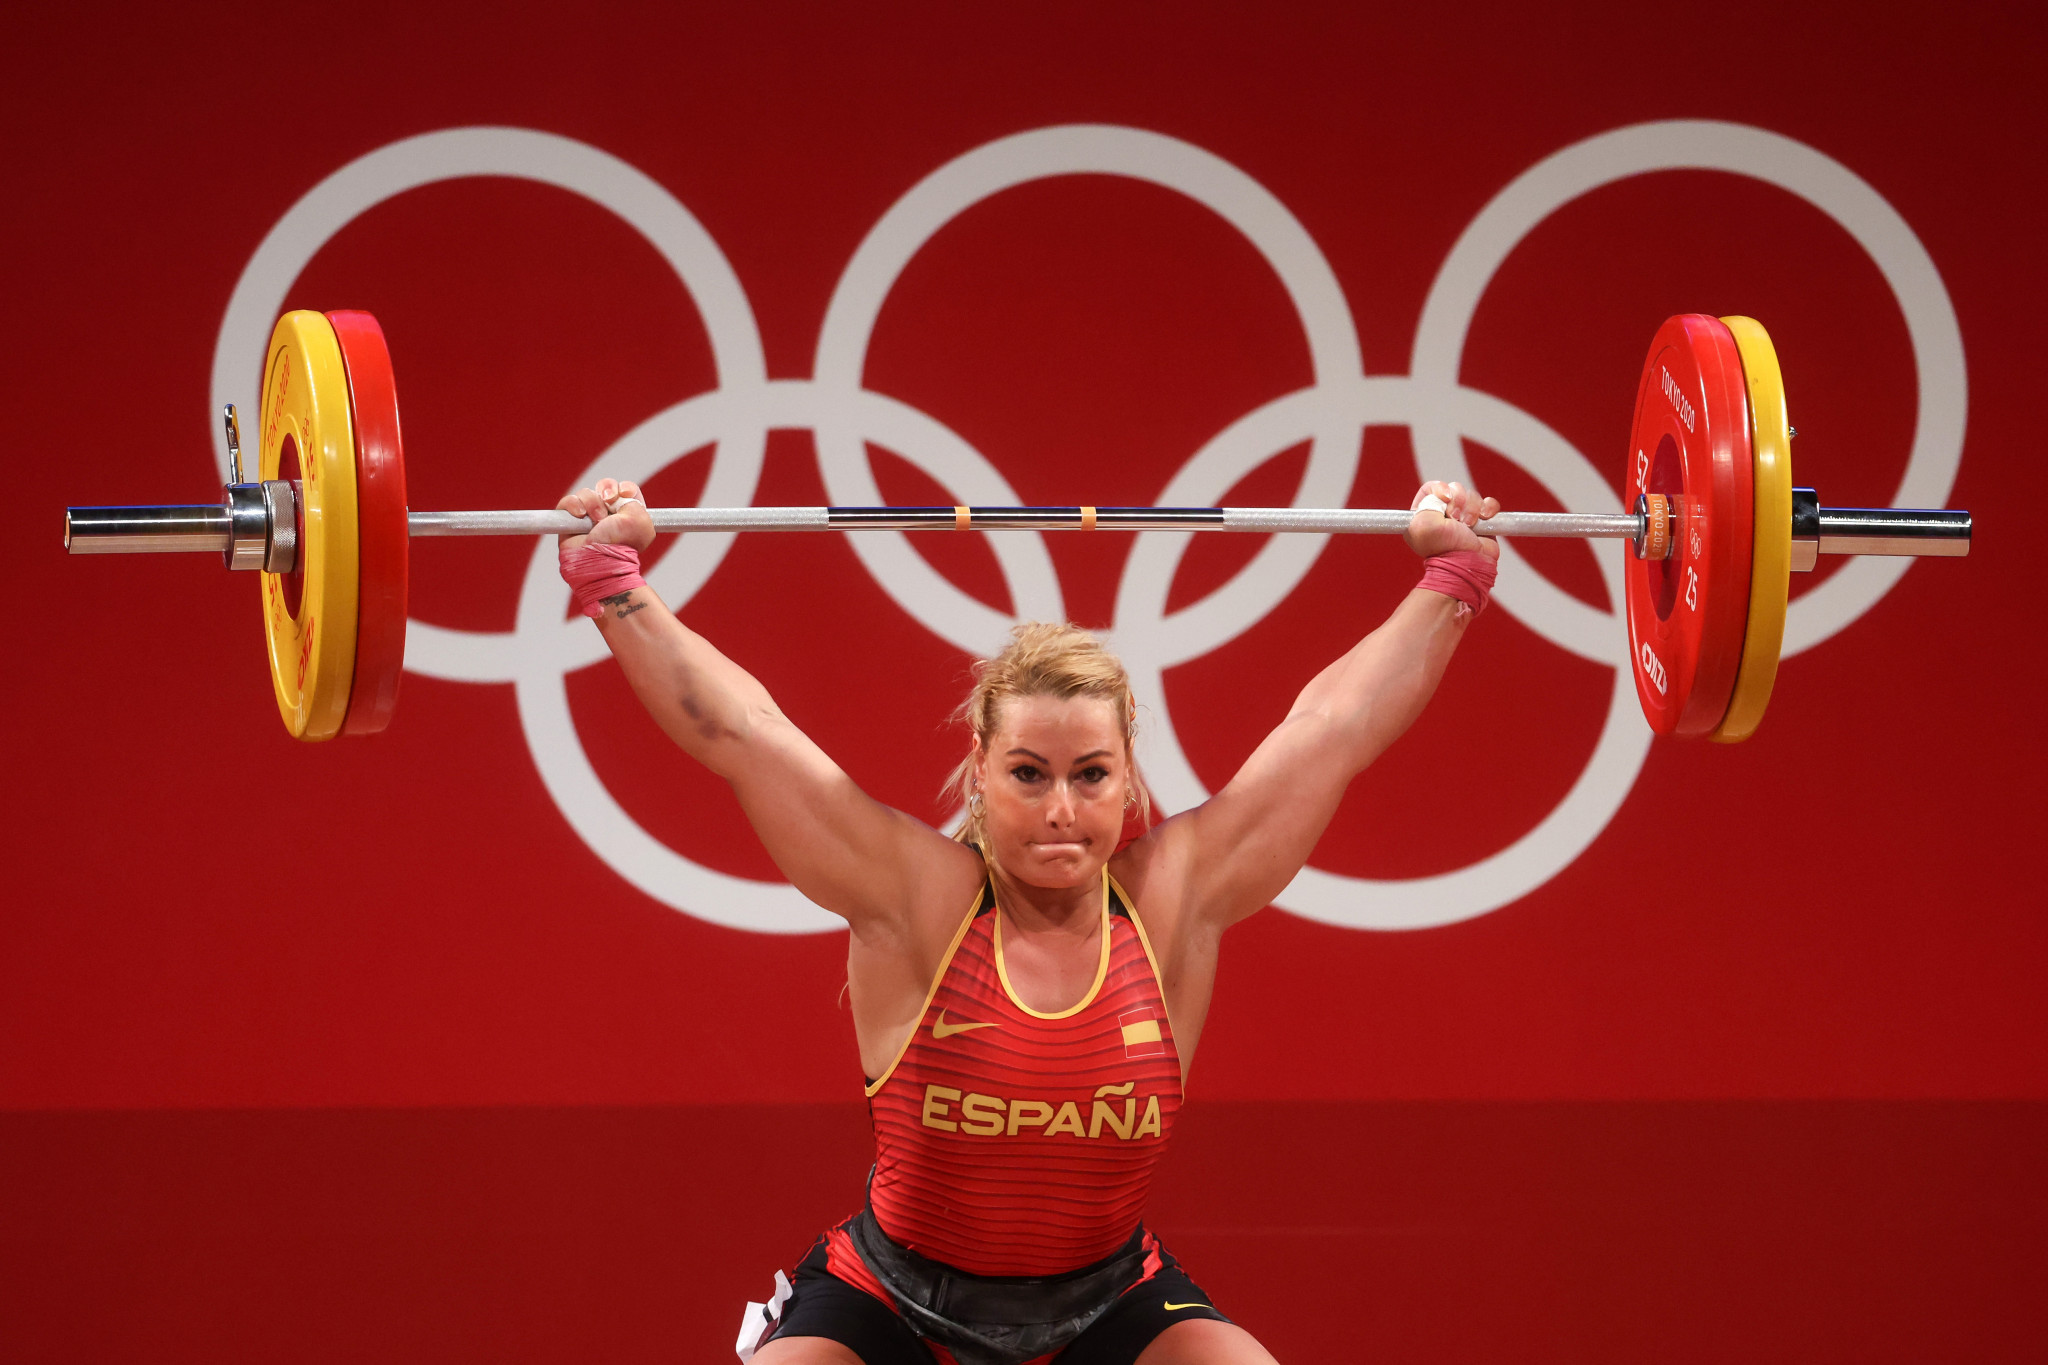 Lydia Valentin suffered a hip injury before lifting at the delayed Tokyo 2020 Games, where she finished tenth ©Getty Images